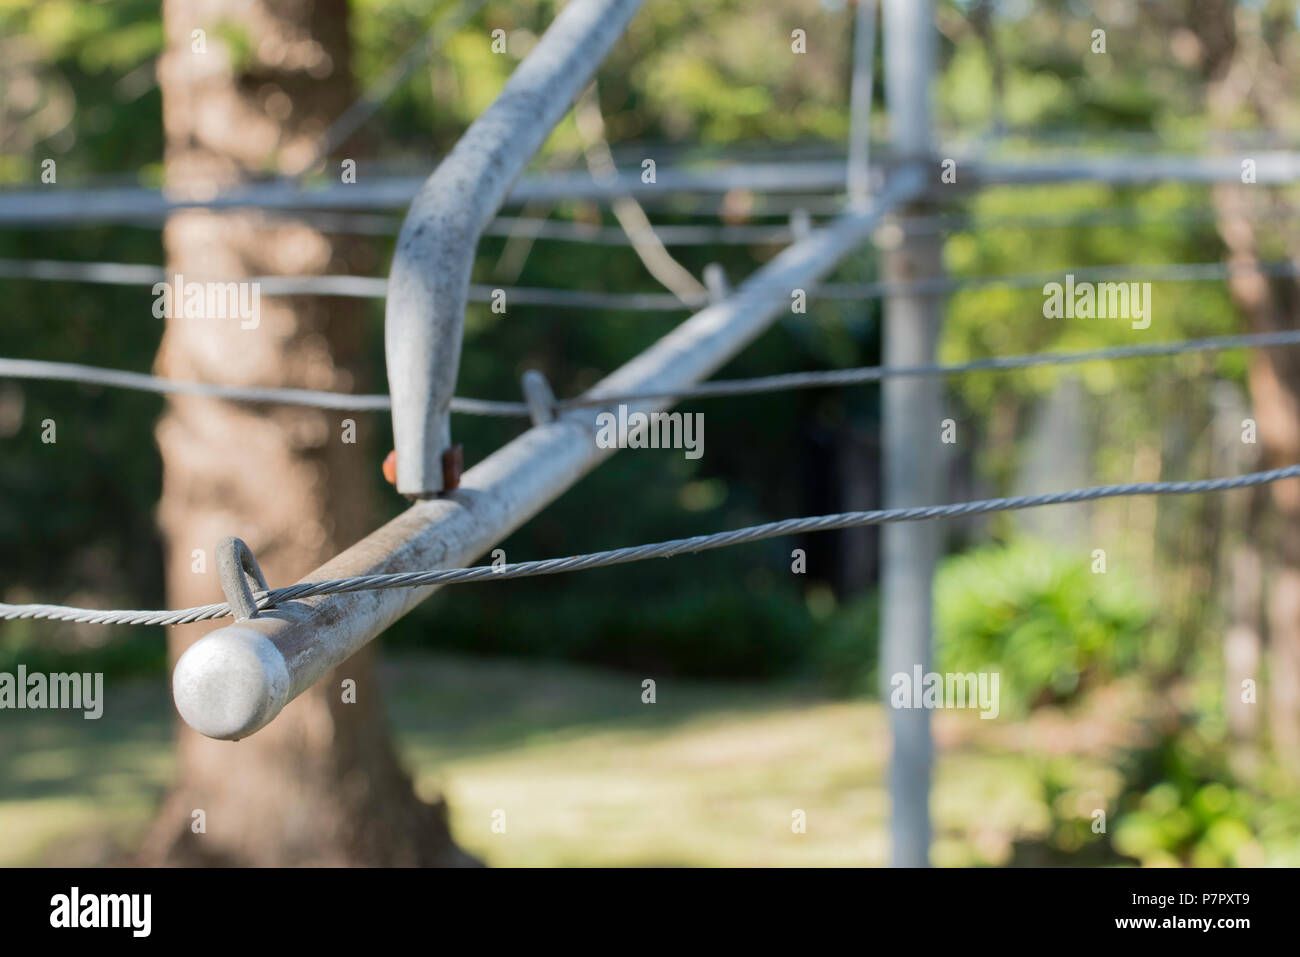 looking up at a partial view of the wire line and wings or arms of a Hills Hoist backyard clothes drying line in Australia Stock Photo